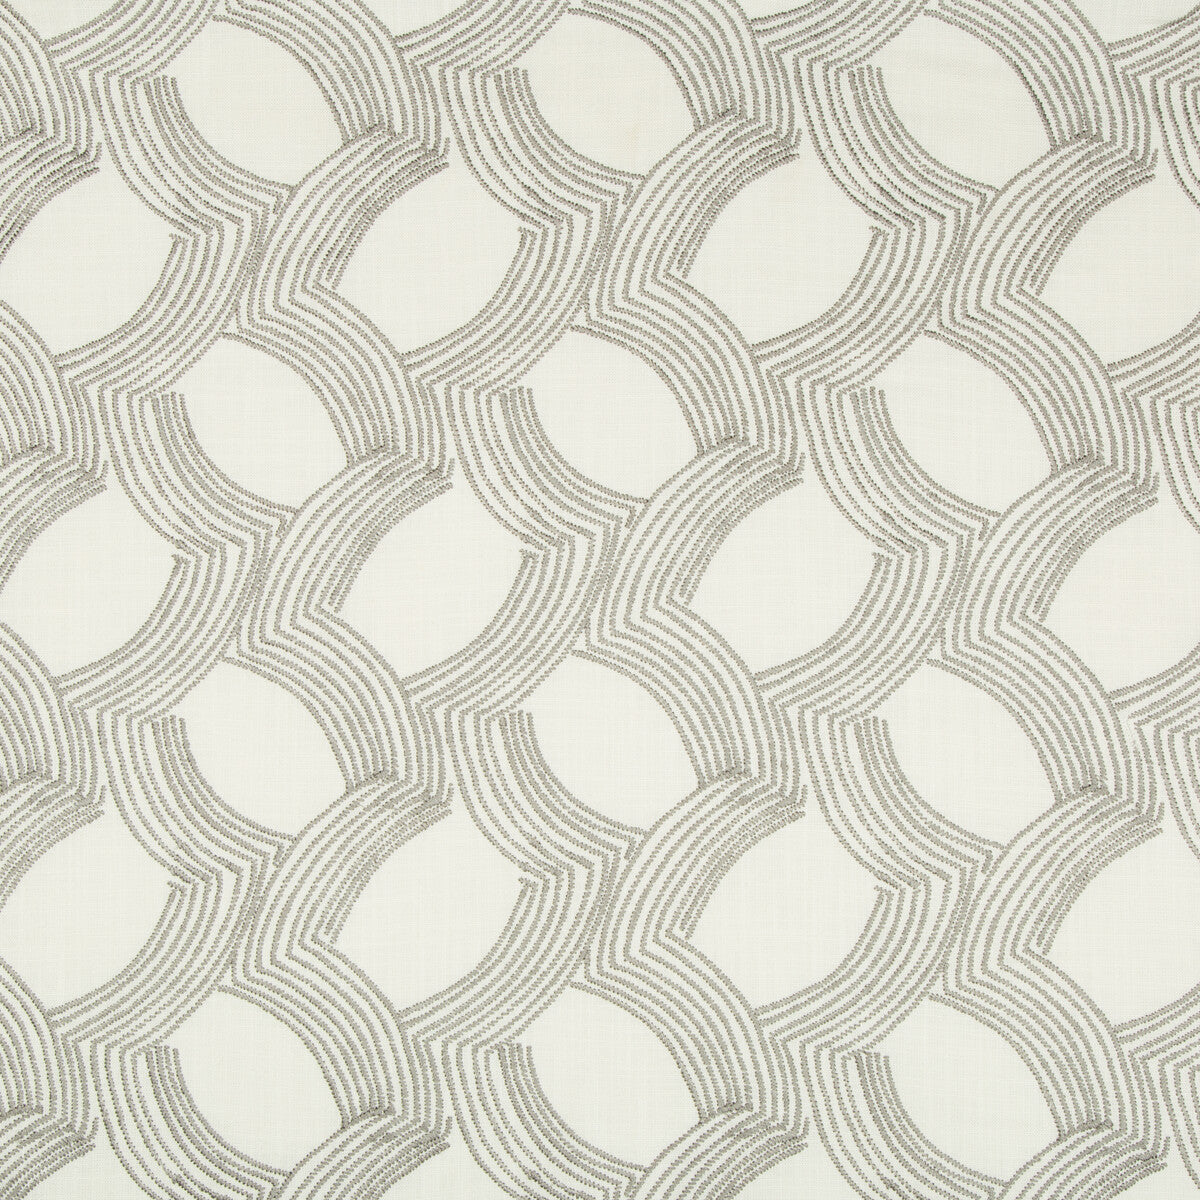 Whyknot fabric in dove color - pattern 34858.11.0 - by Kravet Design in the Thom Filicia Altitude collection